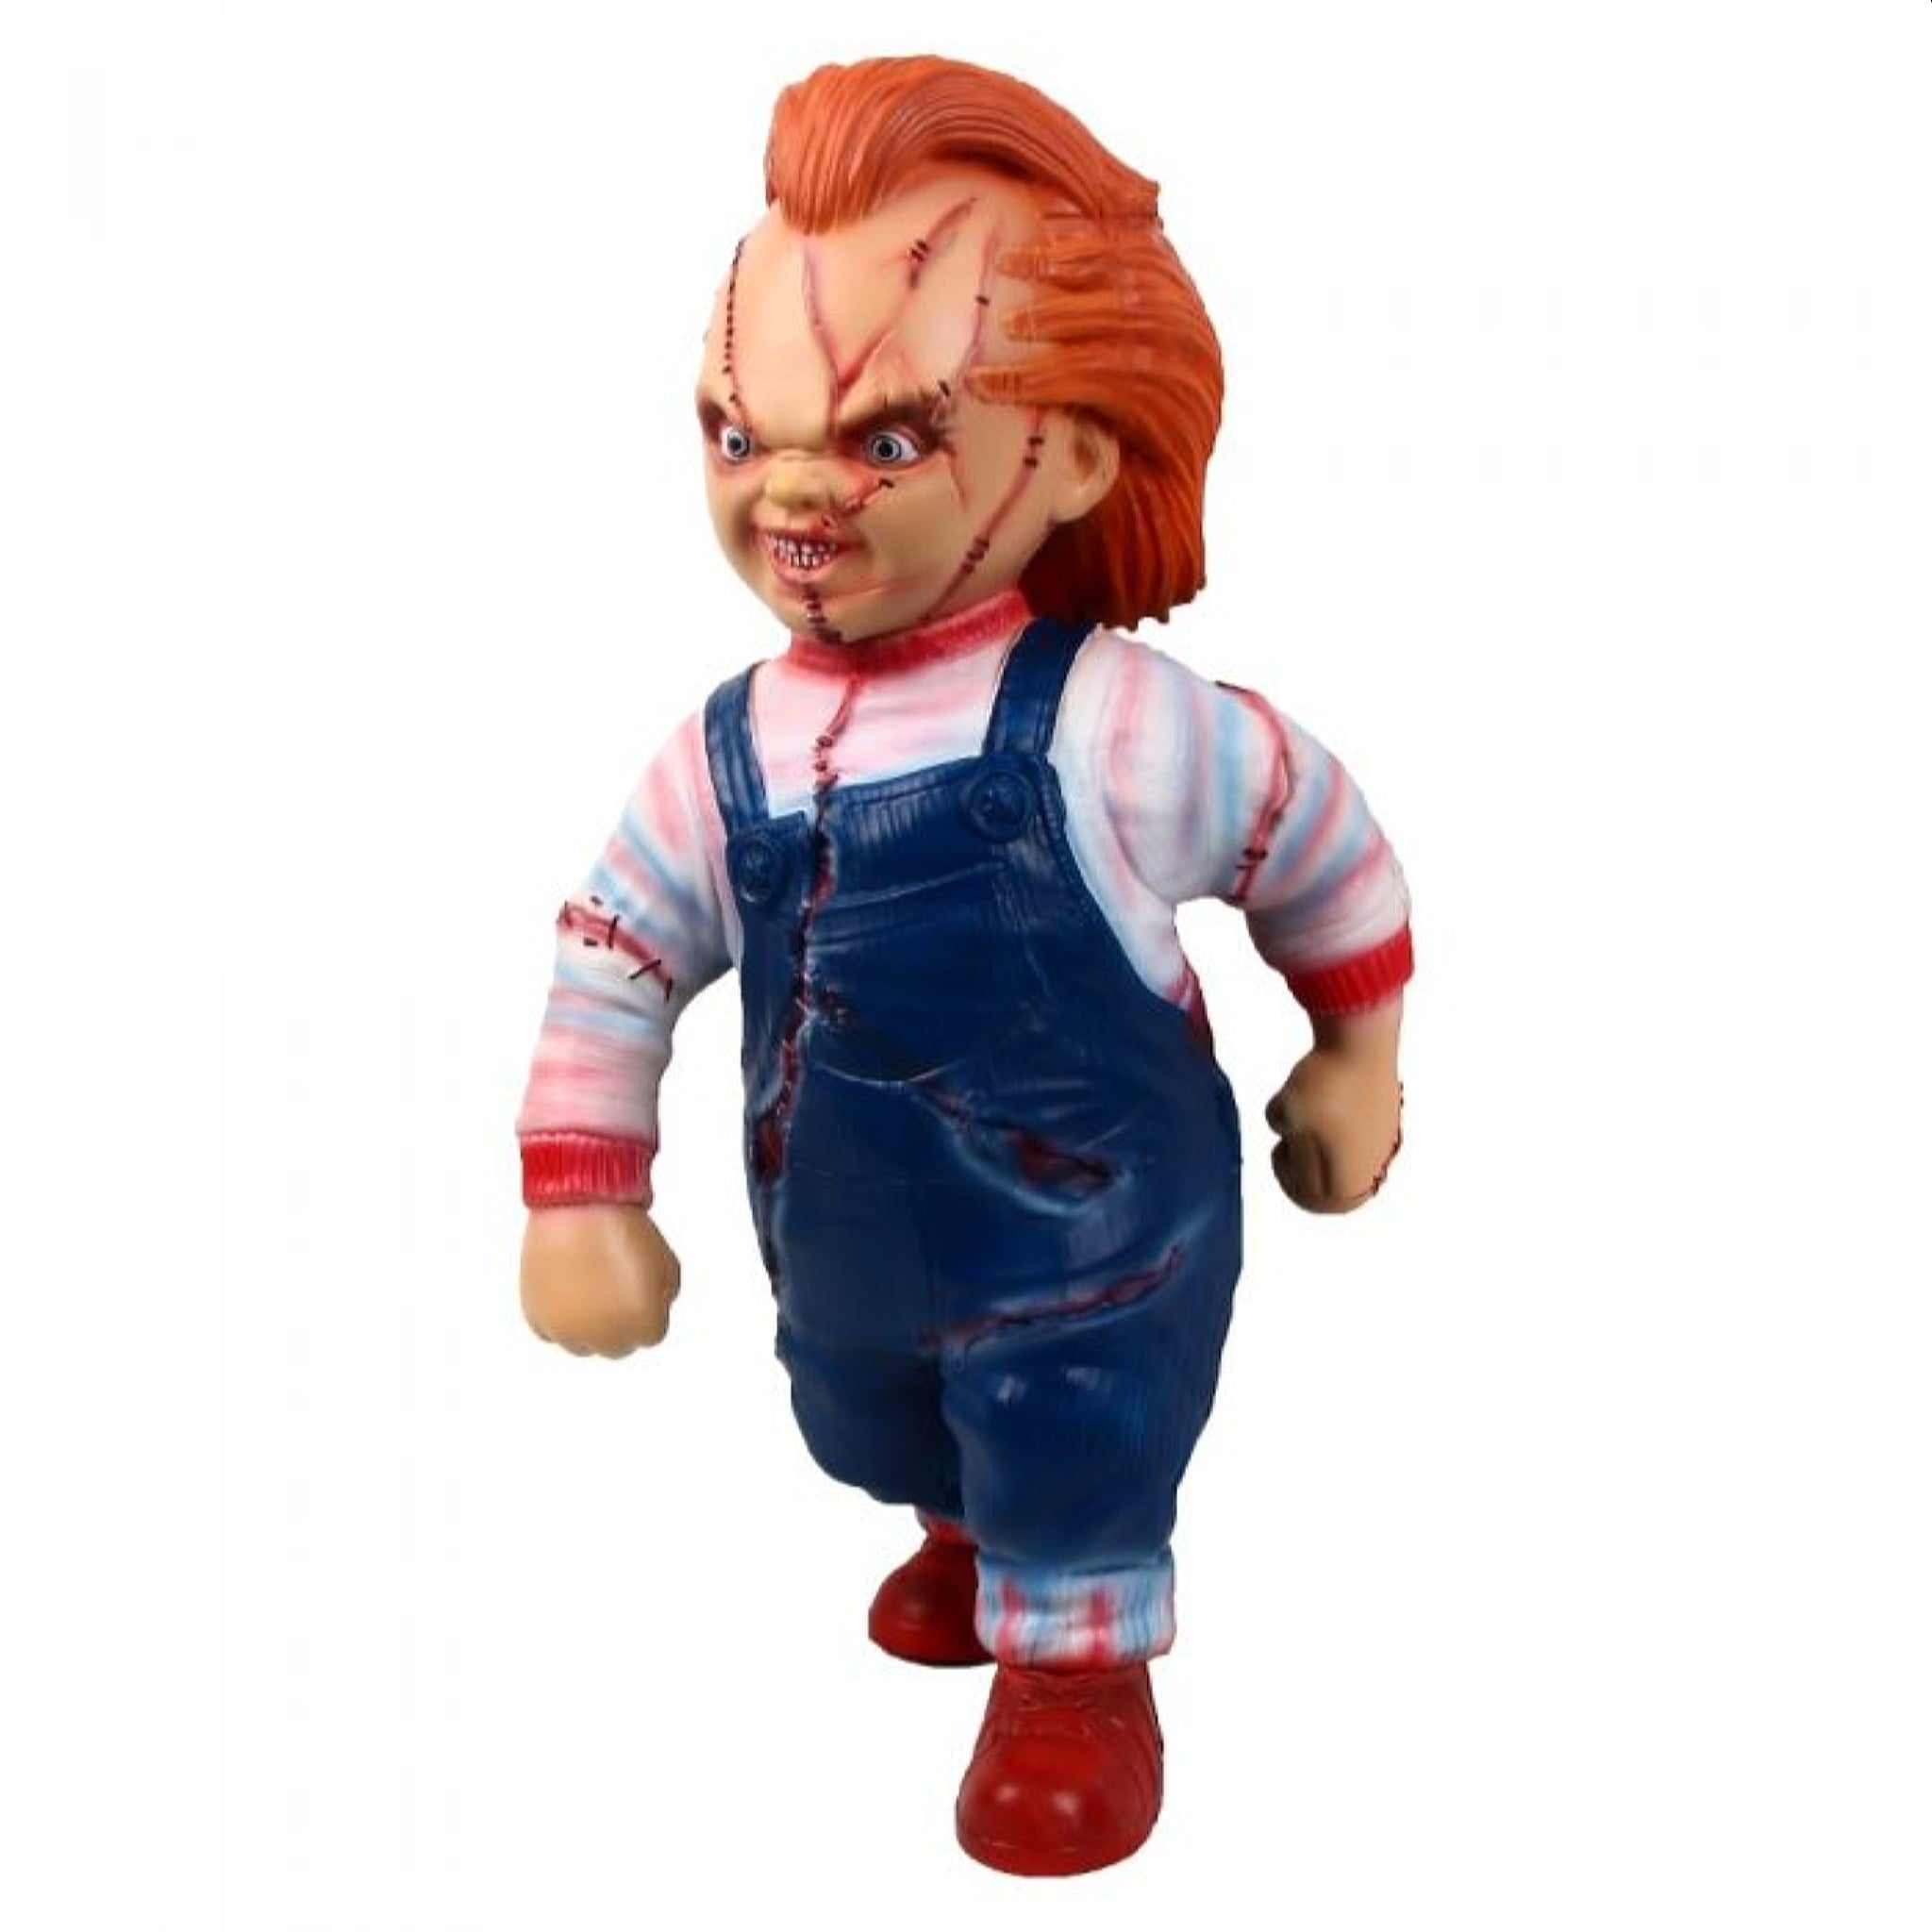 Cosplay Prop Replica Chucky Horror Child Good Guy Bad Guy Scarred Latex Doll